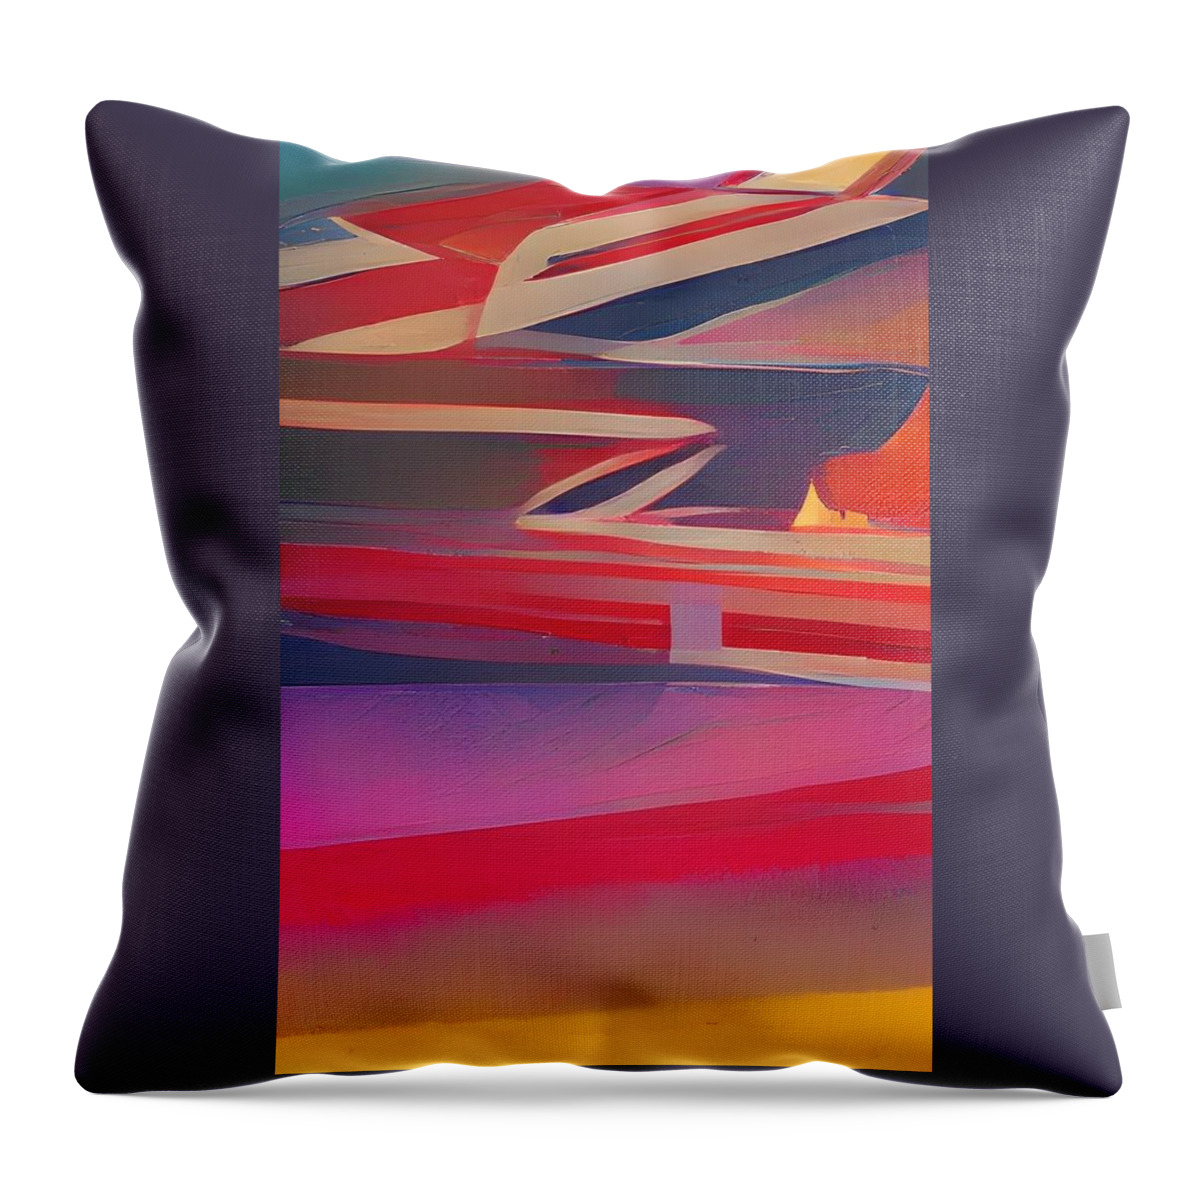  Throw Pillow featuring the digital art ZigZag by Rod Turner